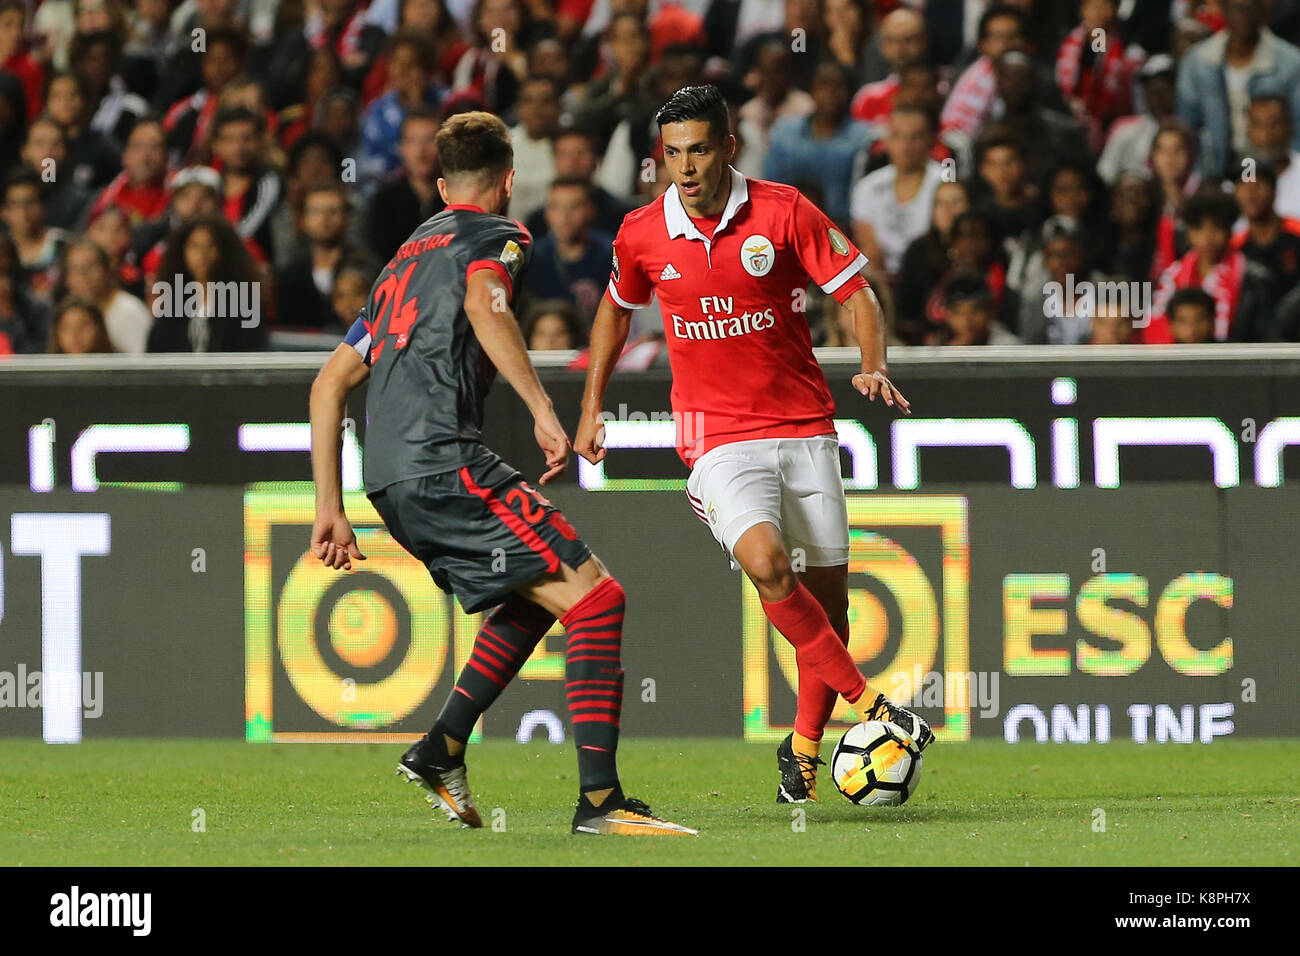 Lisbon, Portugal. 20th Sep, 2017. Benfica's forward Raul Jimenez from Mexico and Braga's defender Ricardo Ferreira from Portugal during the Portuguese Cup 2017/18 match between SL Benfica v SC Braga, at Luz Stadium in Lisbon on September 20, 2017. Credit: Bruno Barros/Alamy Live News Stock Photo